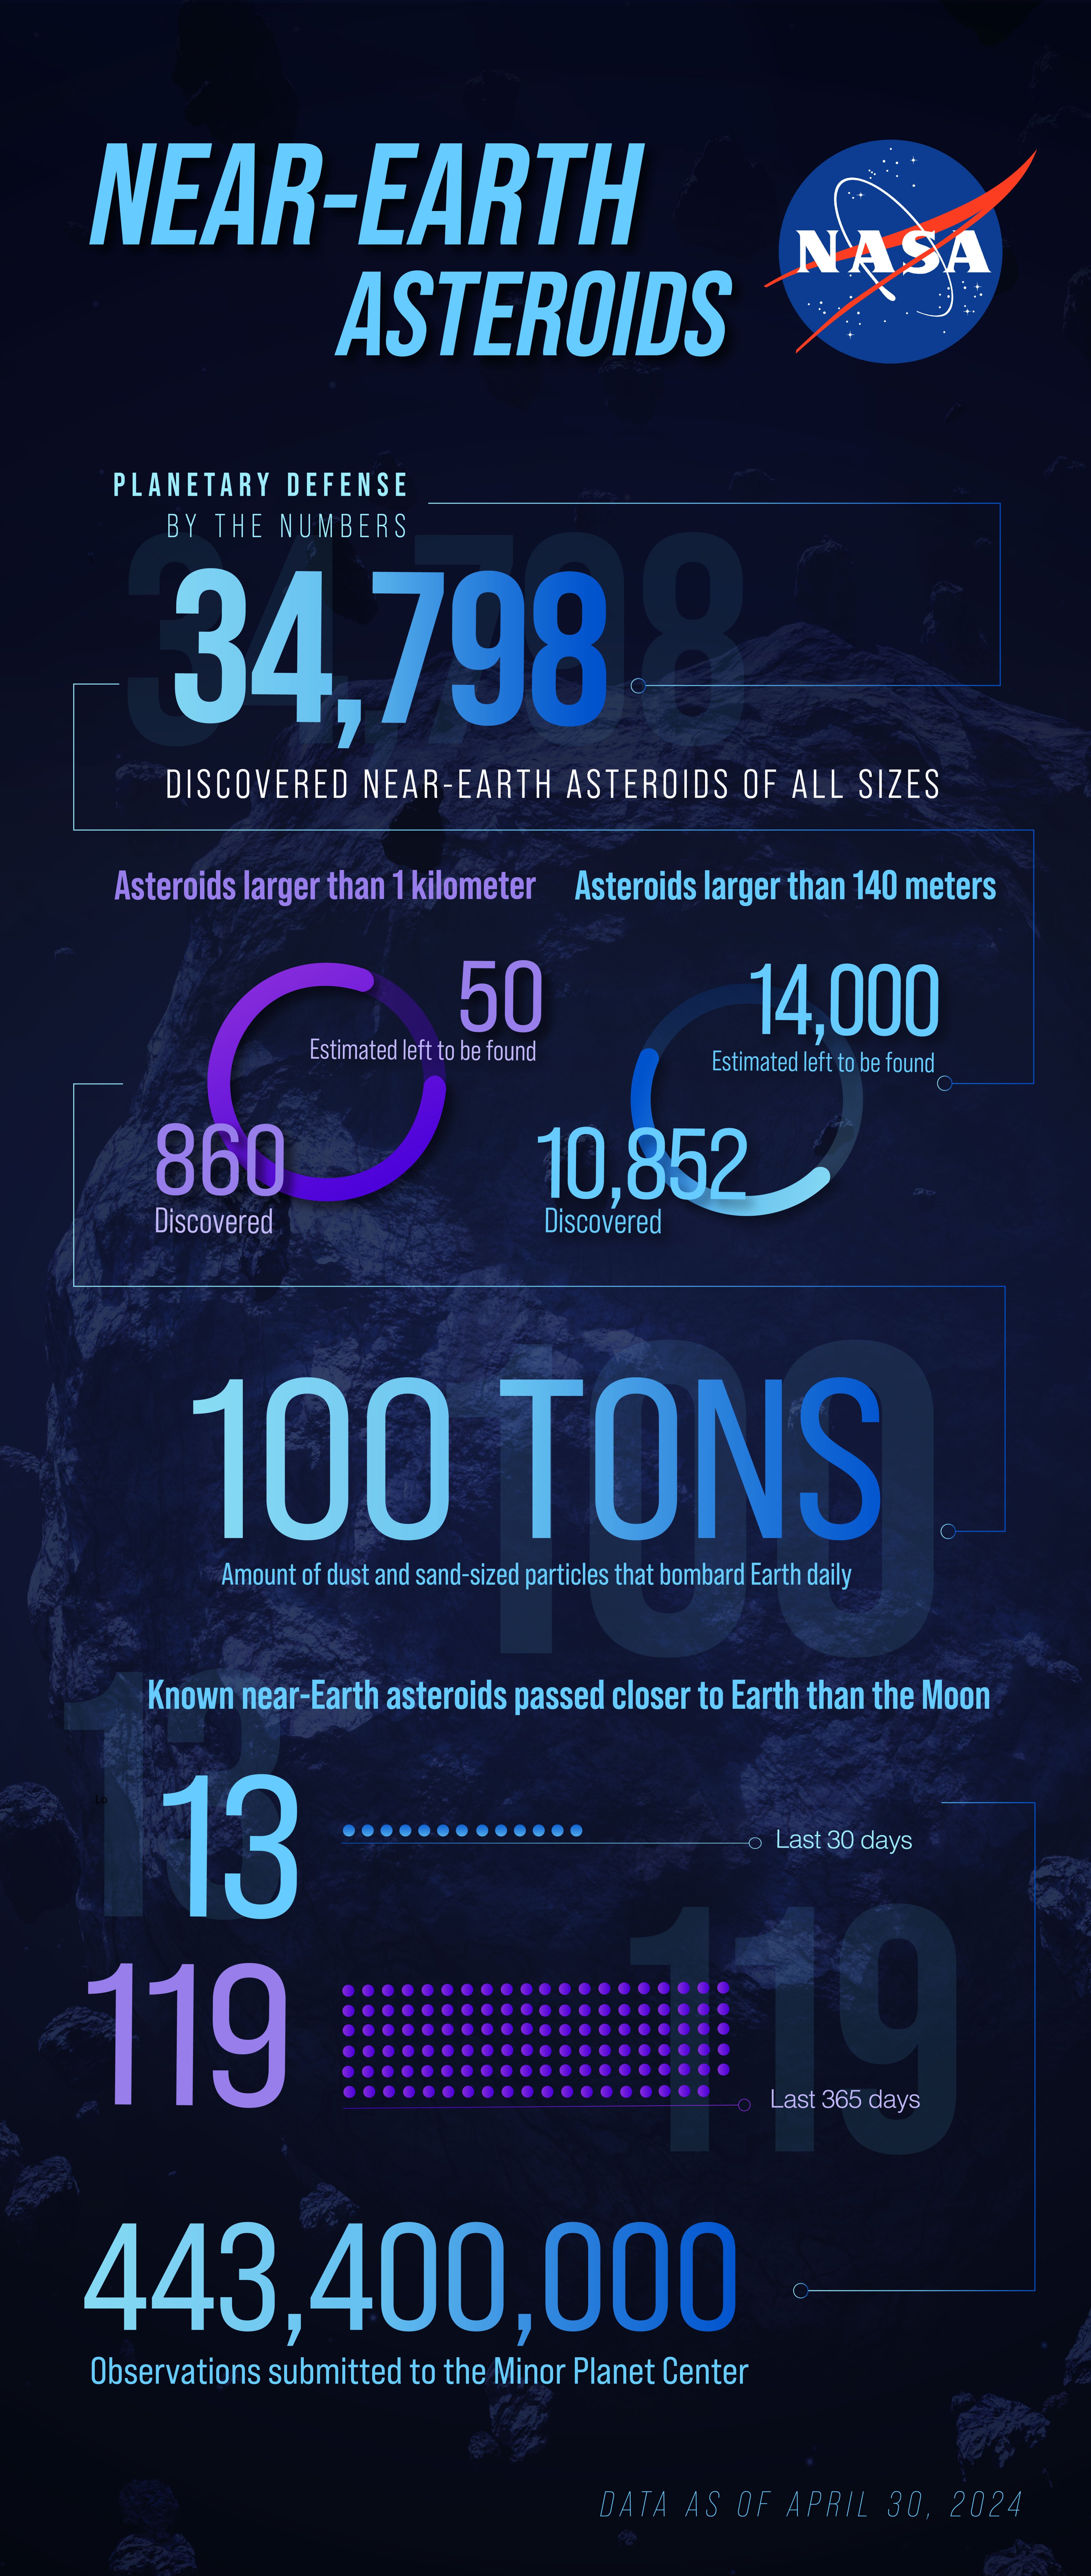 Infographic for Planetary Defense by the numbers. The title reads Near-Earth Asteroids next to the NASA logo. 34,798 discovered near-earth asteroids of all sizes. 860 discovered and 50 estimated left to be found asteroids larger than 1 km. 10,852 discovered and 15,000 estimated left to be found asteroids larger than 140 meters. 100 Tons: Amount of dust and sand-sized particles that bombard Earth daily. 13 known near-Earth asteroids passed closer to Earth than the moon in the last 30 days, 119 in the last 365 days and 443,400,000 observations submitted to the Minor Planet Center.